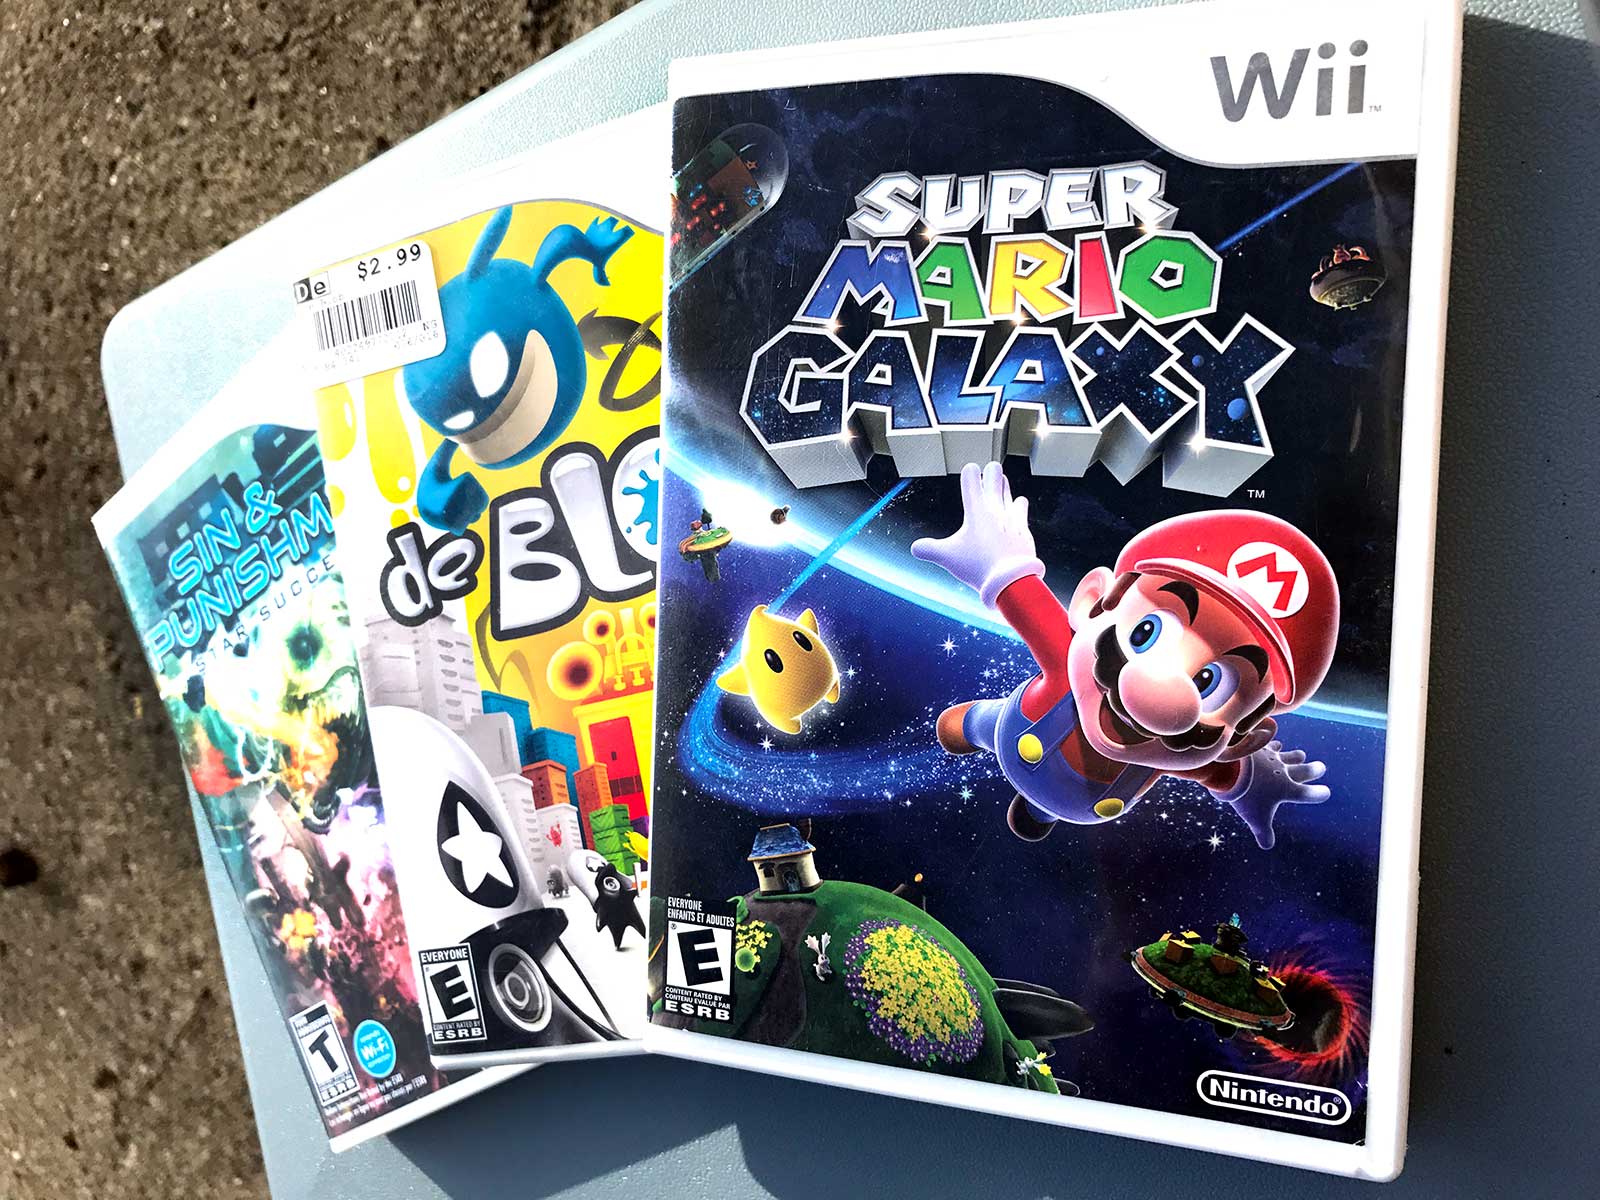 nintendo wii games for sale near me